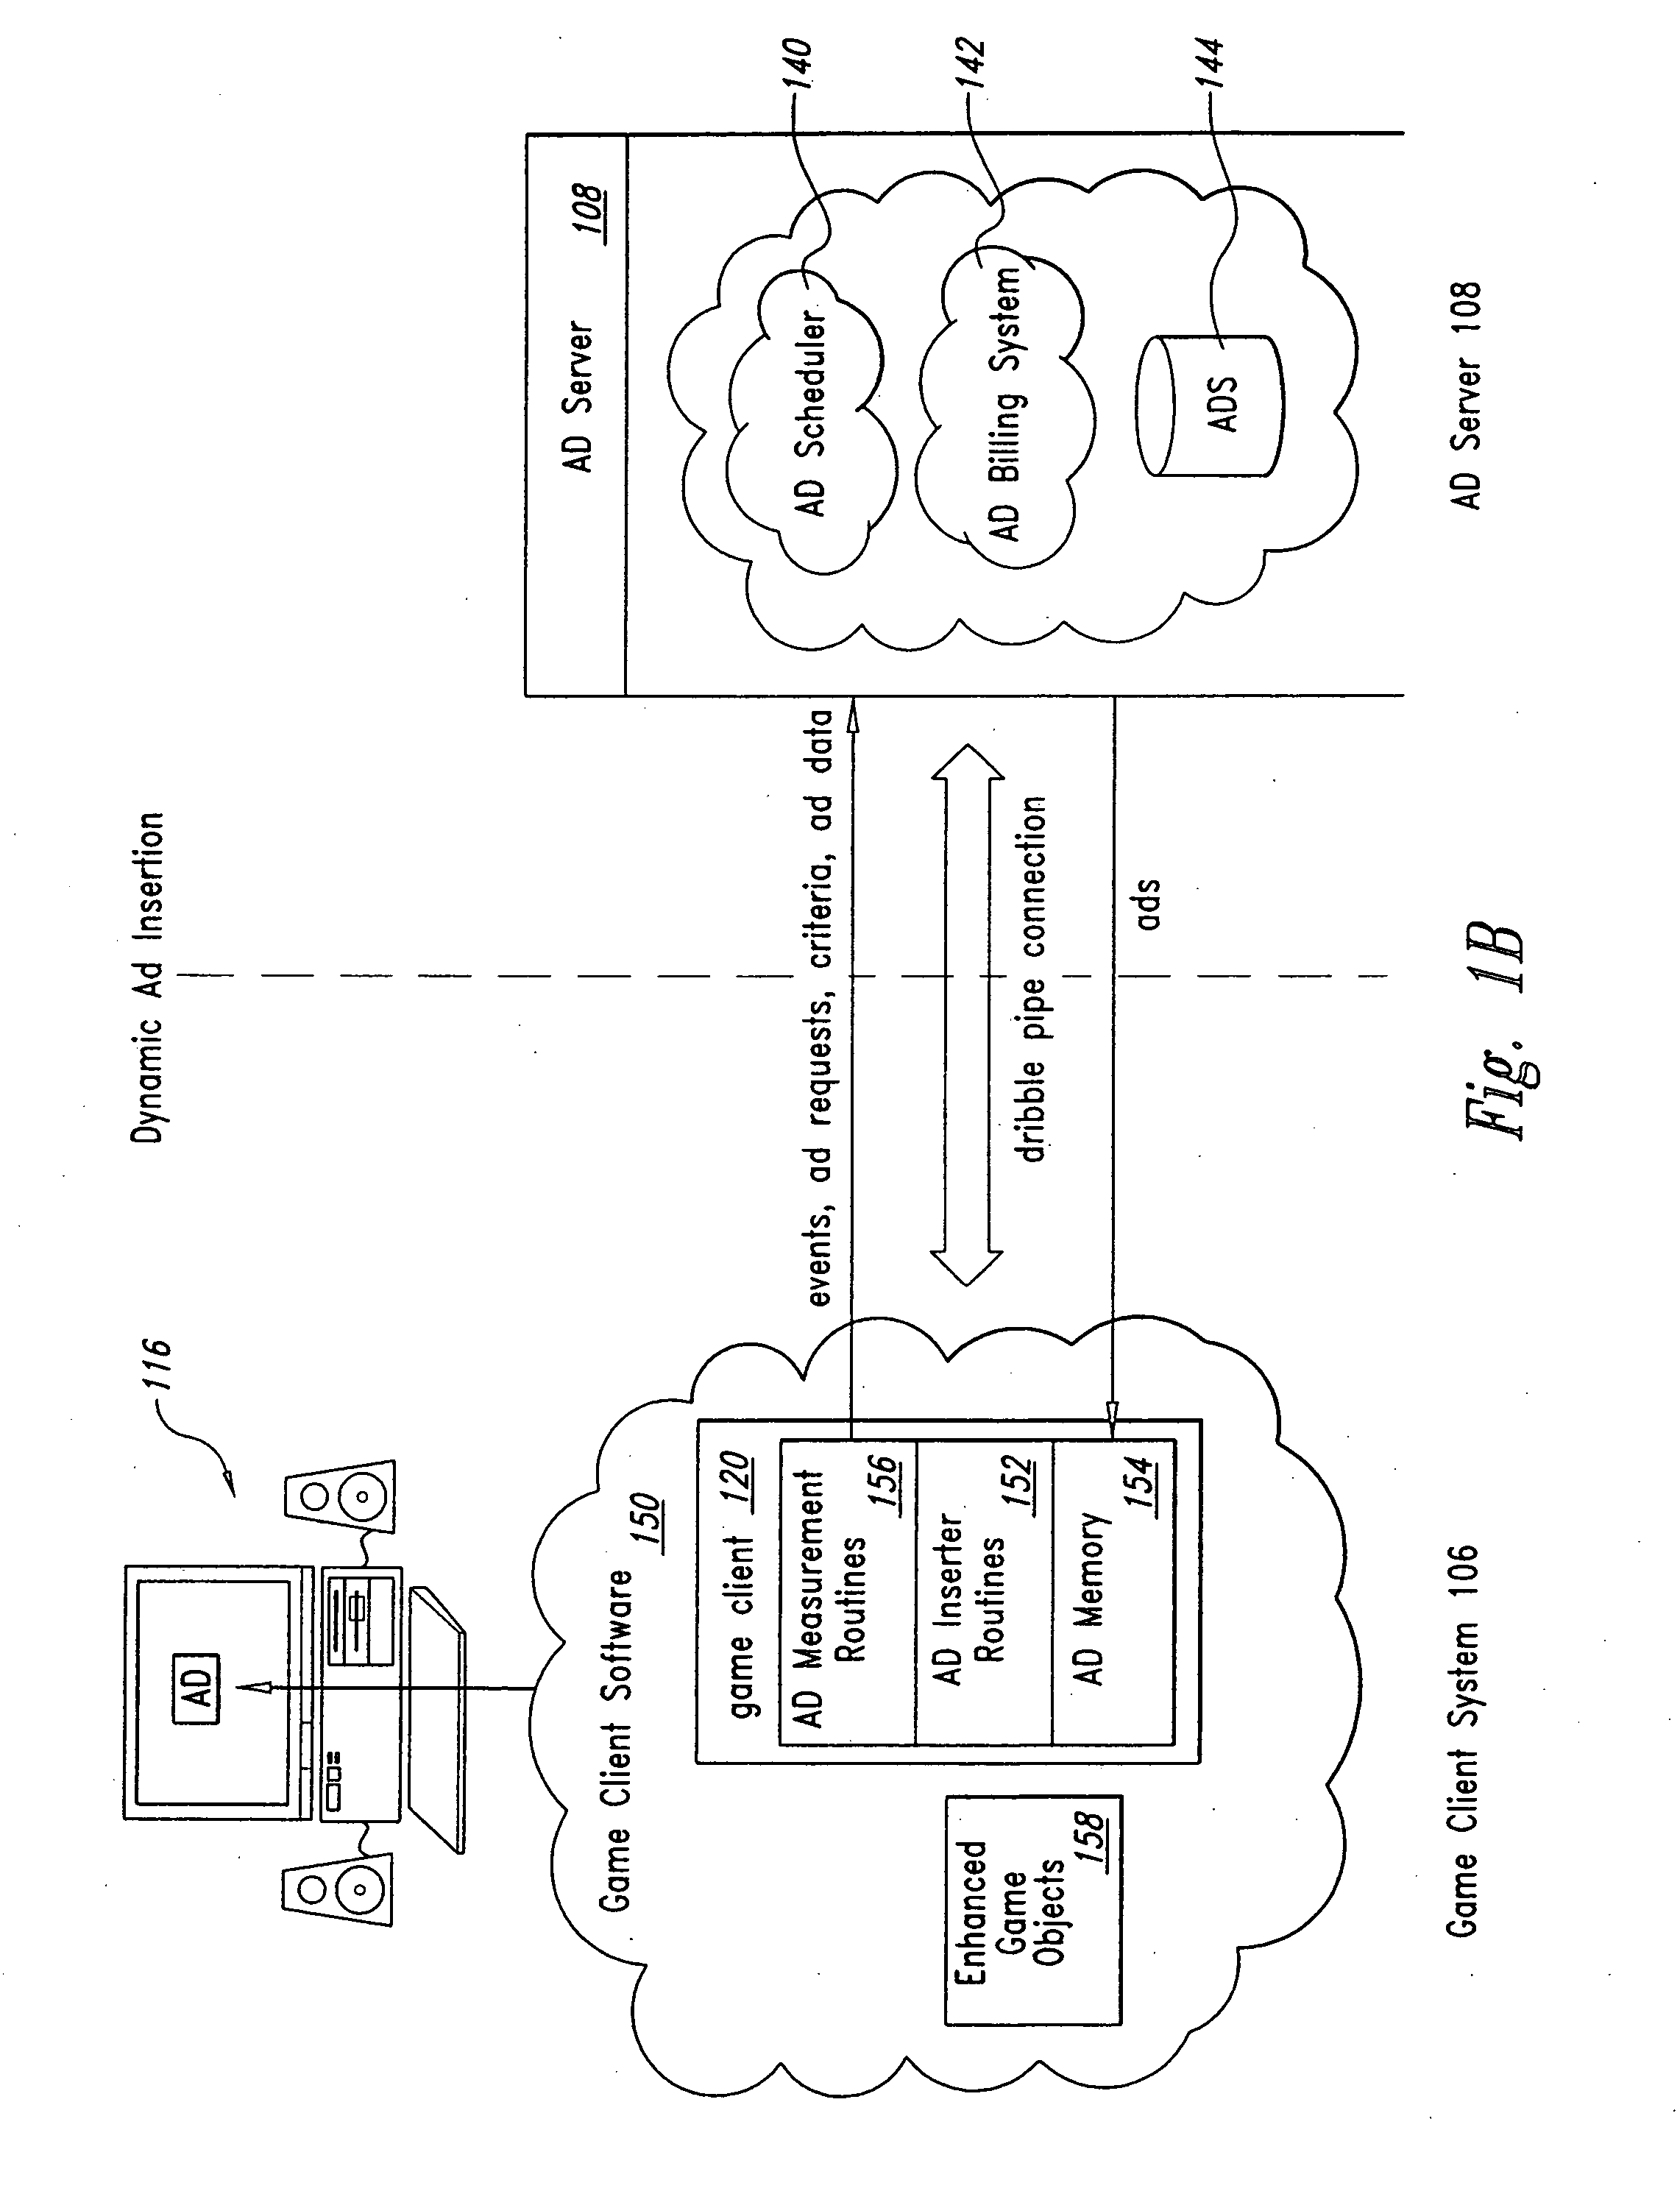 Method and system for collecting and communicating dynamically incorporated advertising information